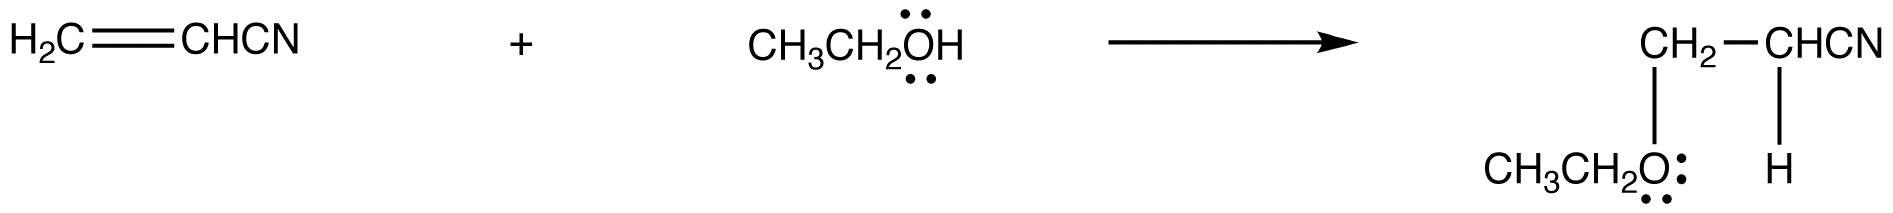 nucleophilicaddition3.png